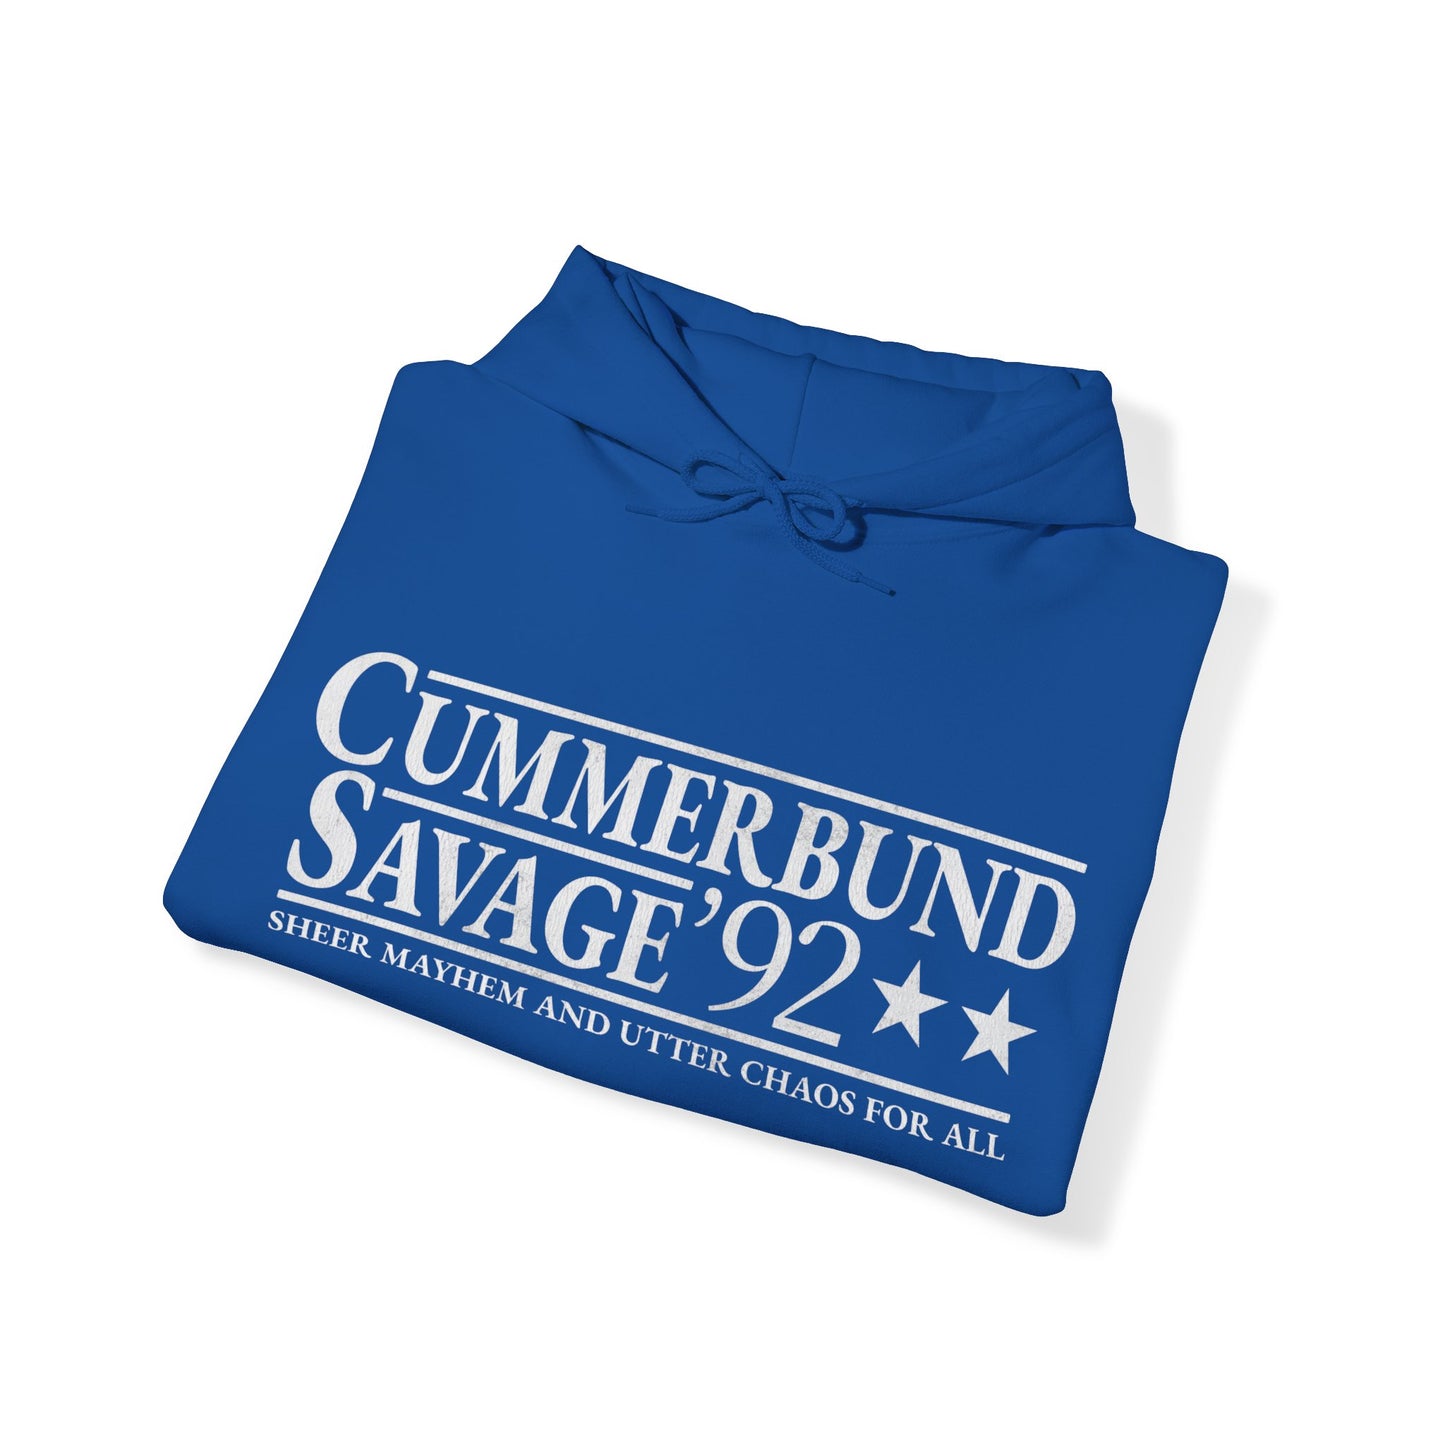 Cummerbund for President Colorful and White Hoodie